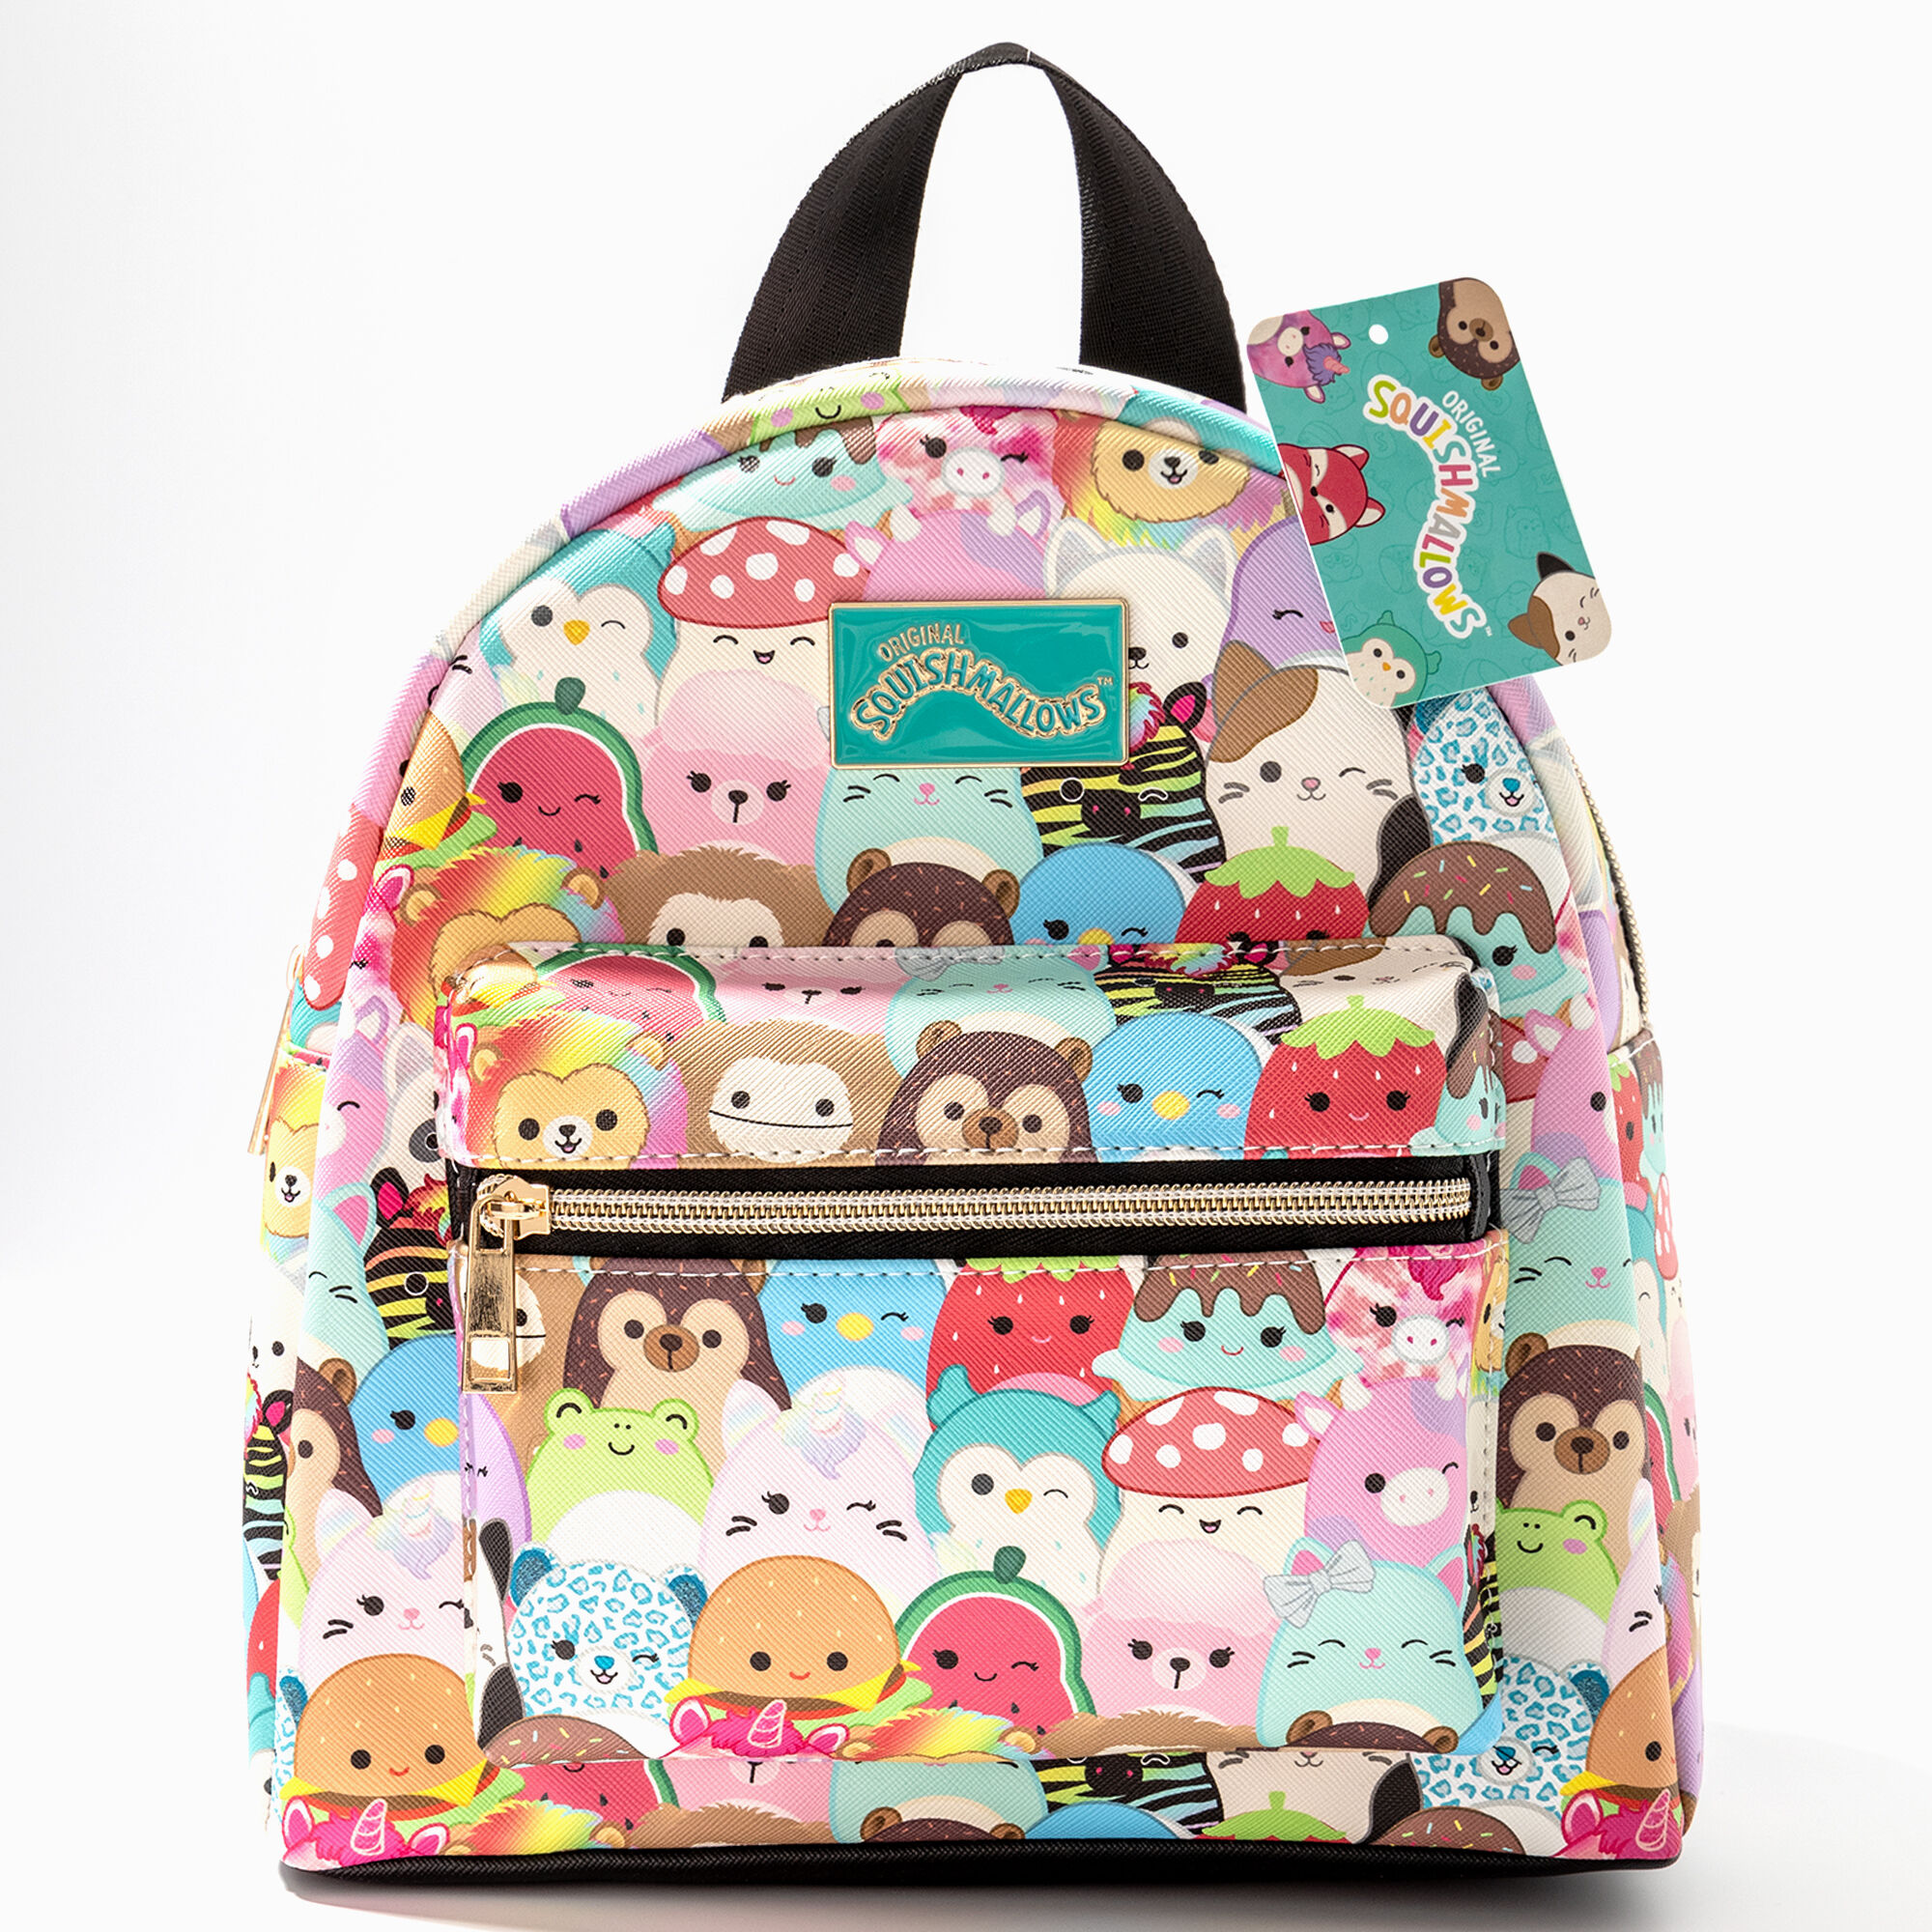 View Claires Squishmallows Mini Backpack information